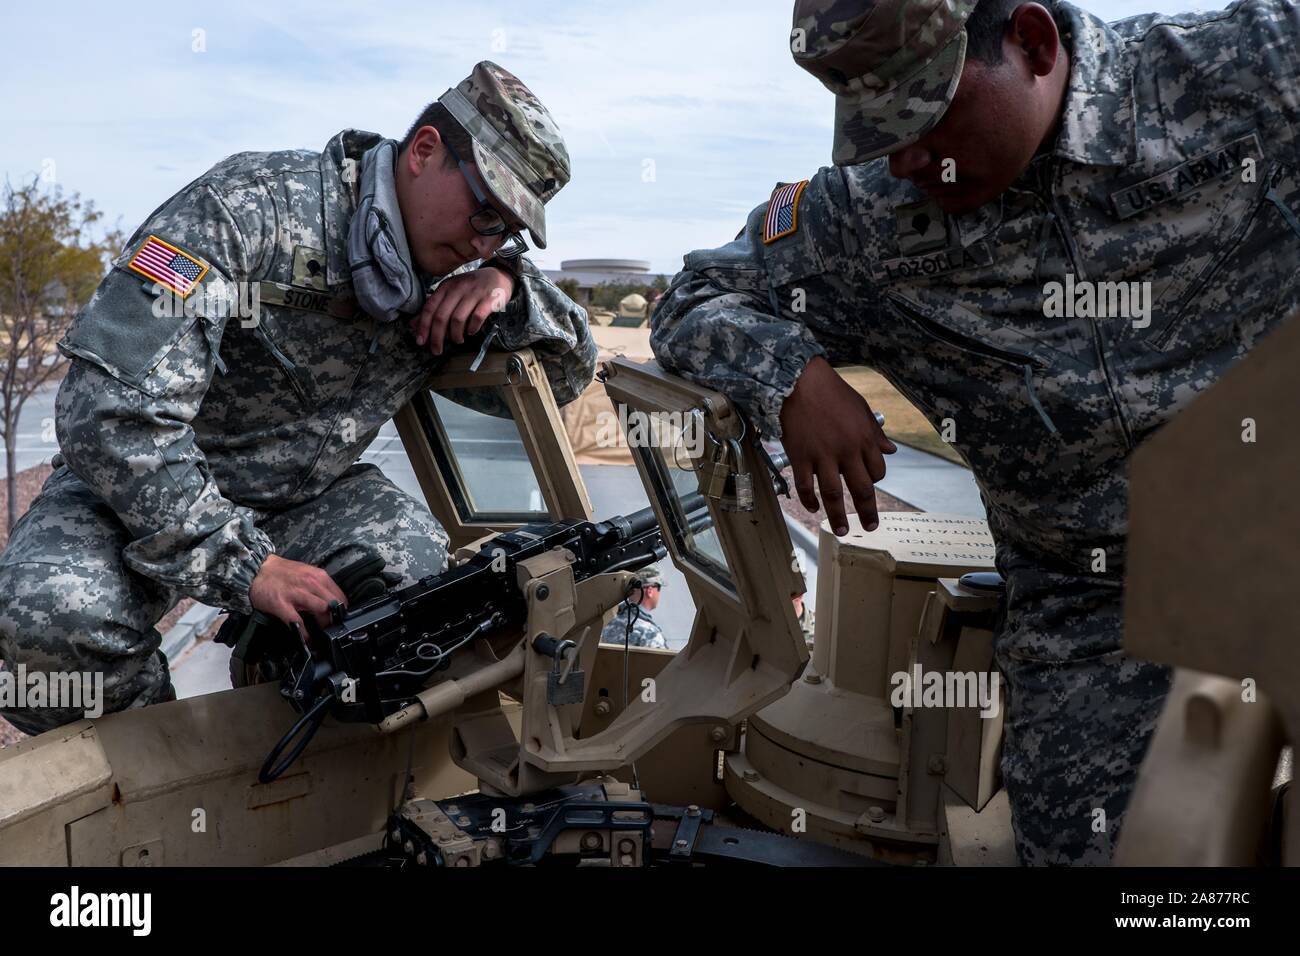 El Paso, Texas, USA. 6th Nov, 2019. SPC. DOMINIQUE STONE, left, and SPC. PAUL LOZOLLA, right, of the 3rd Armored Brigade Combat Team, 1st Armored Division, stand on top of an M1A2 Abrams Tank on display during the celebration of Torch Week at Fort Bliss in El Paso, Texas. The celebration commemorates the United States' invasion of North Africa during Operation Torch on November 8 through November 16, 1942 during World War II. Credit: Joel Angel Juarez/ZUMA Wire/Alamy Live News Stock Photo